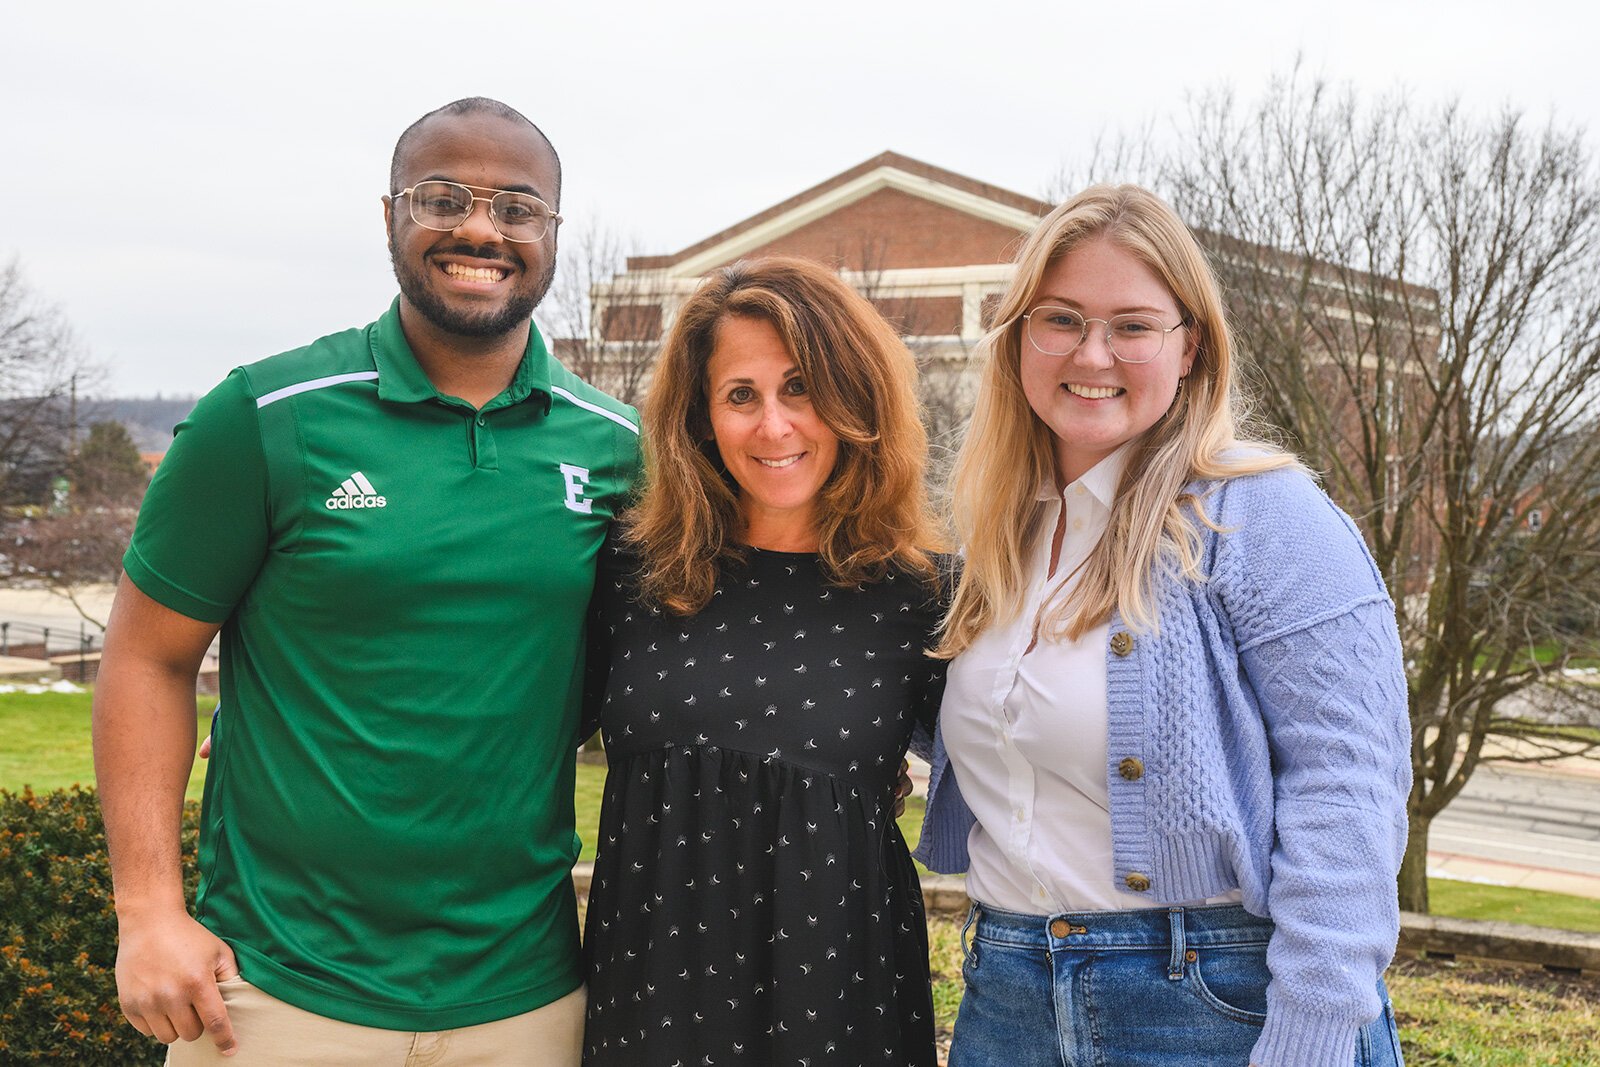 Engage @ EMU Voter Coalition members Lamarr Mitchell, Decky Alexander, and Maggie Whittemore.